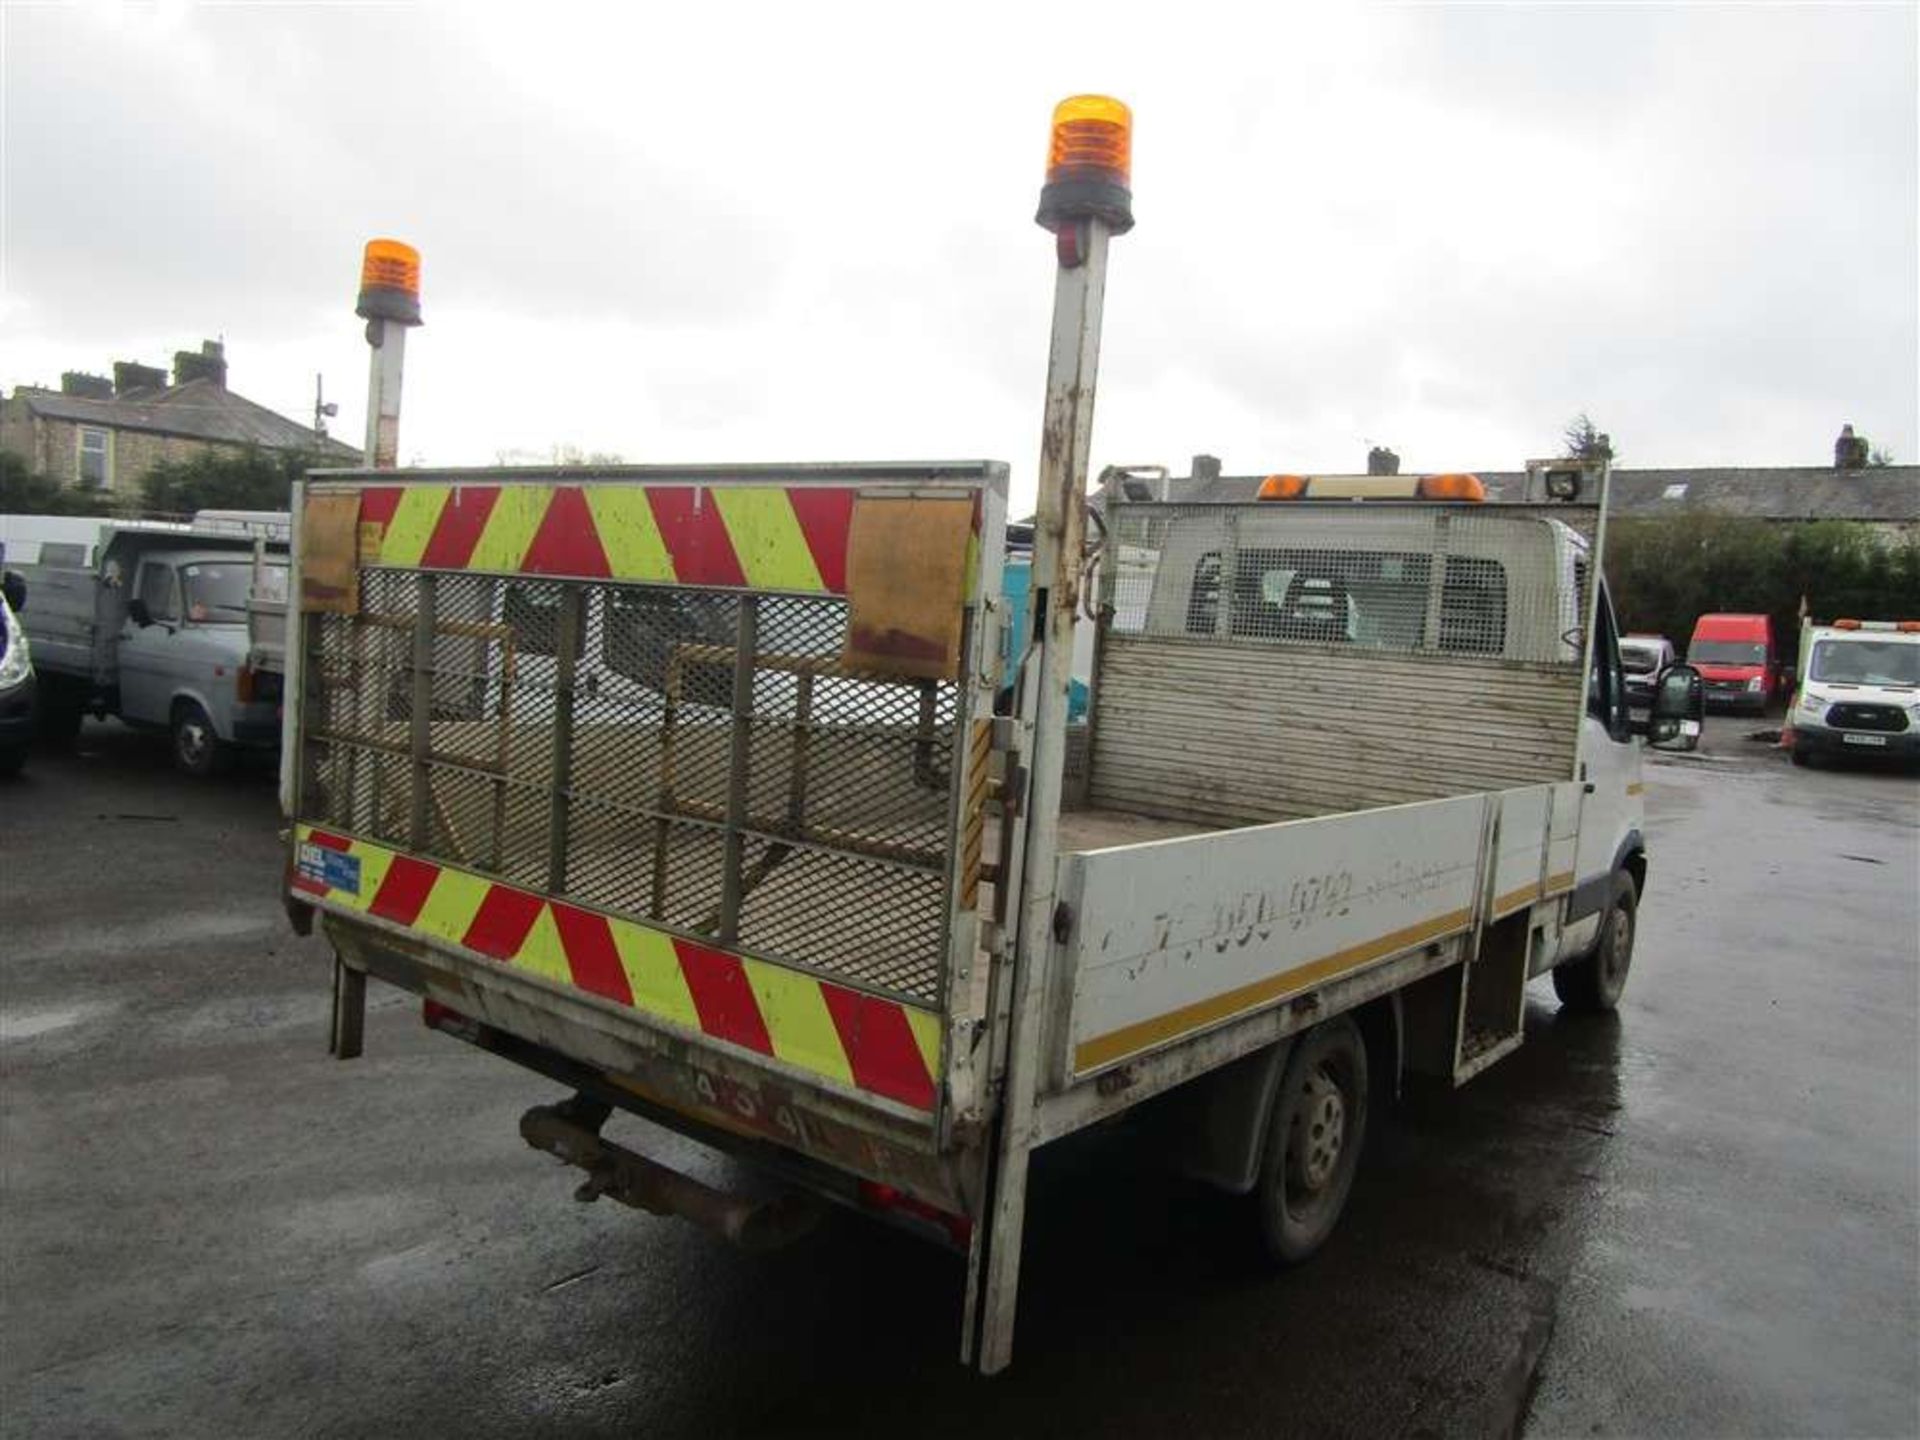 2013 62 reg Iveco Daily 35S13 MWB Flatbed Tail Lift - Image 4 of 6